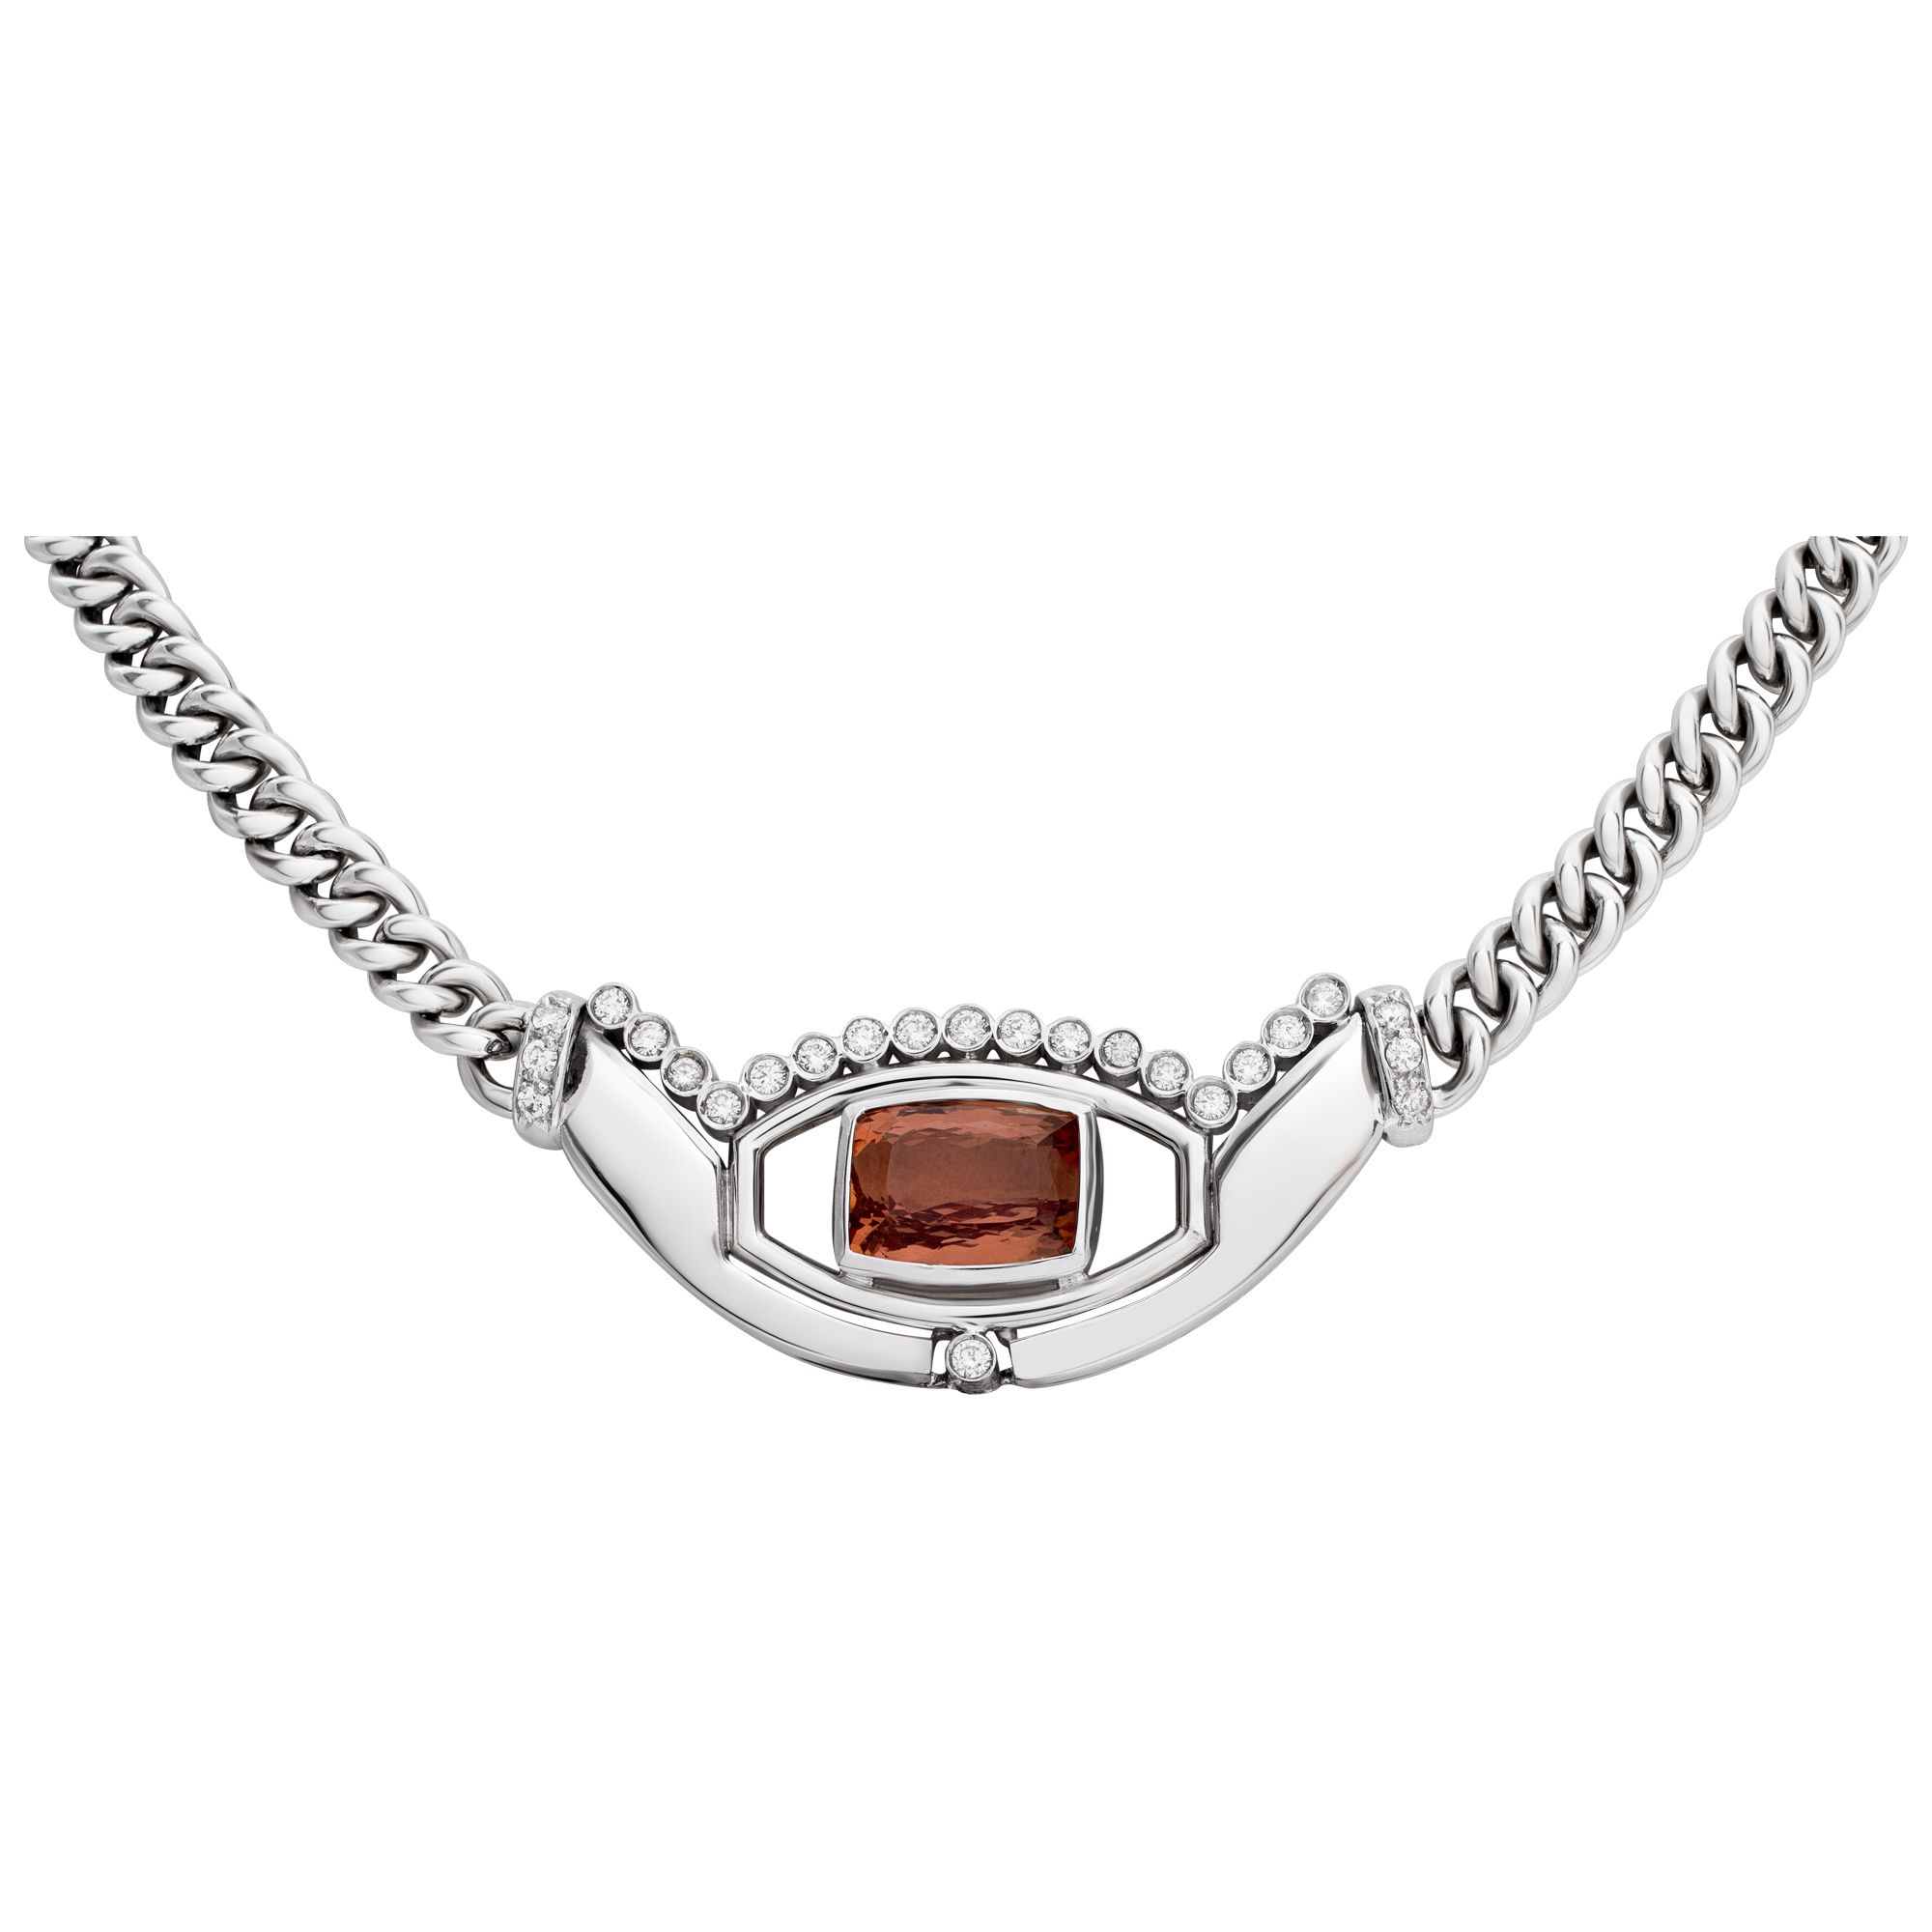 Imperial Topaz and diamond necklace in 18k white gold